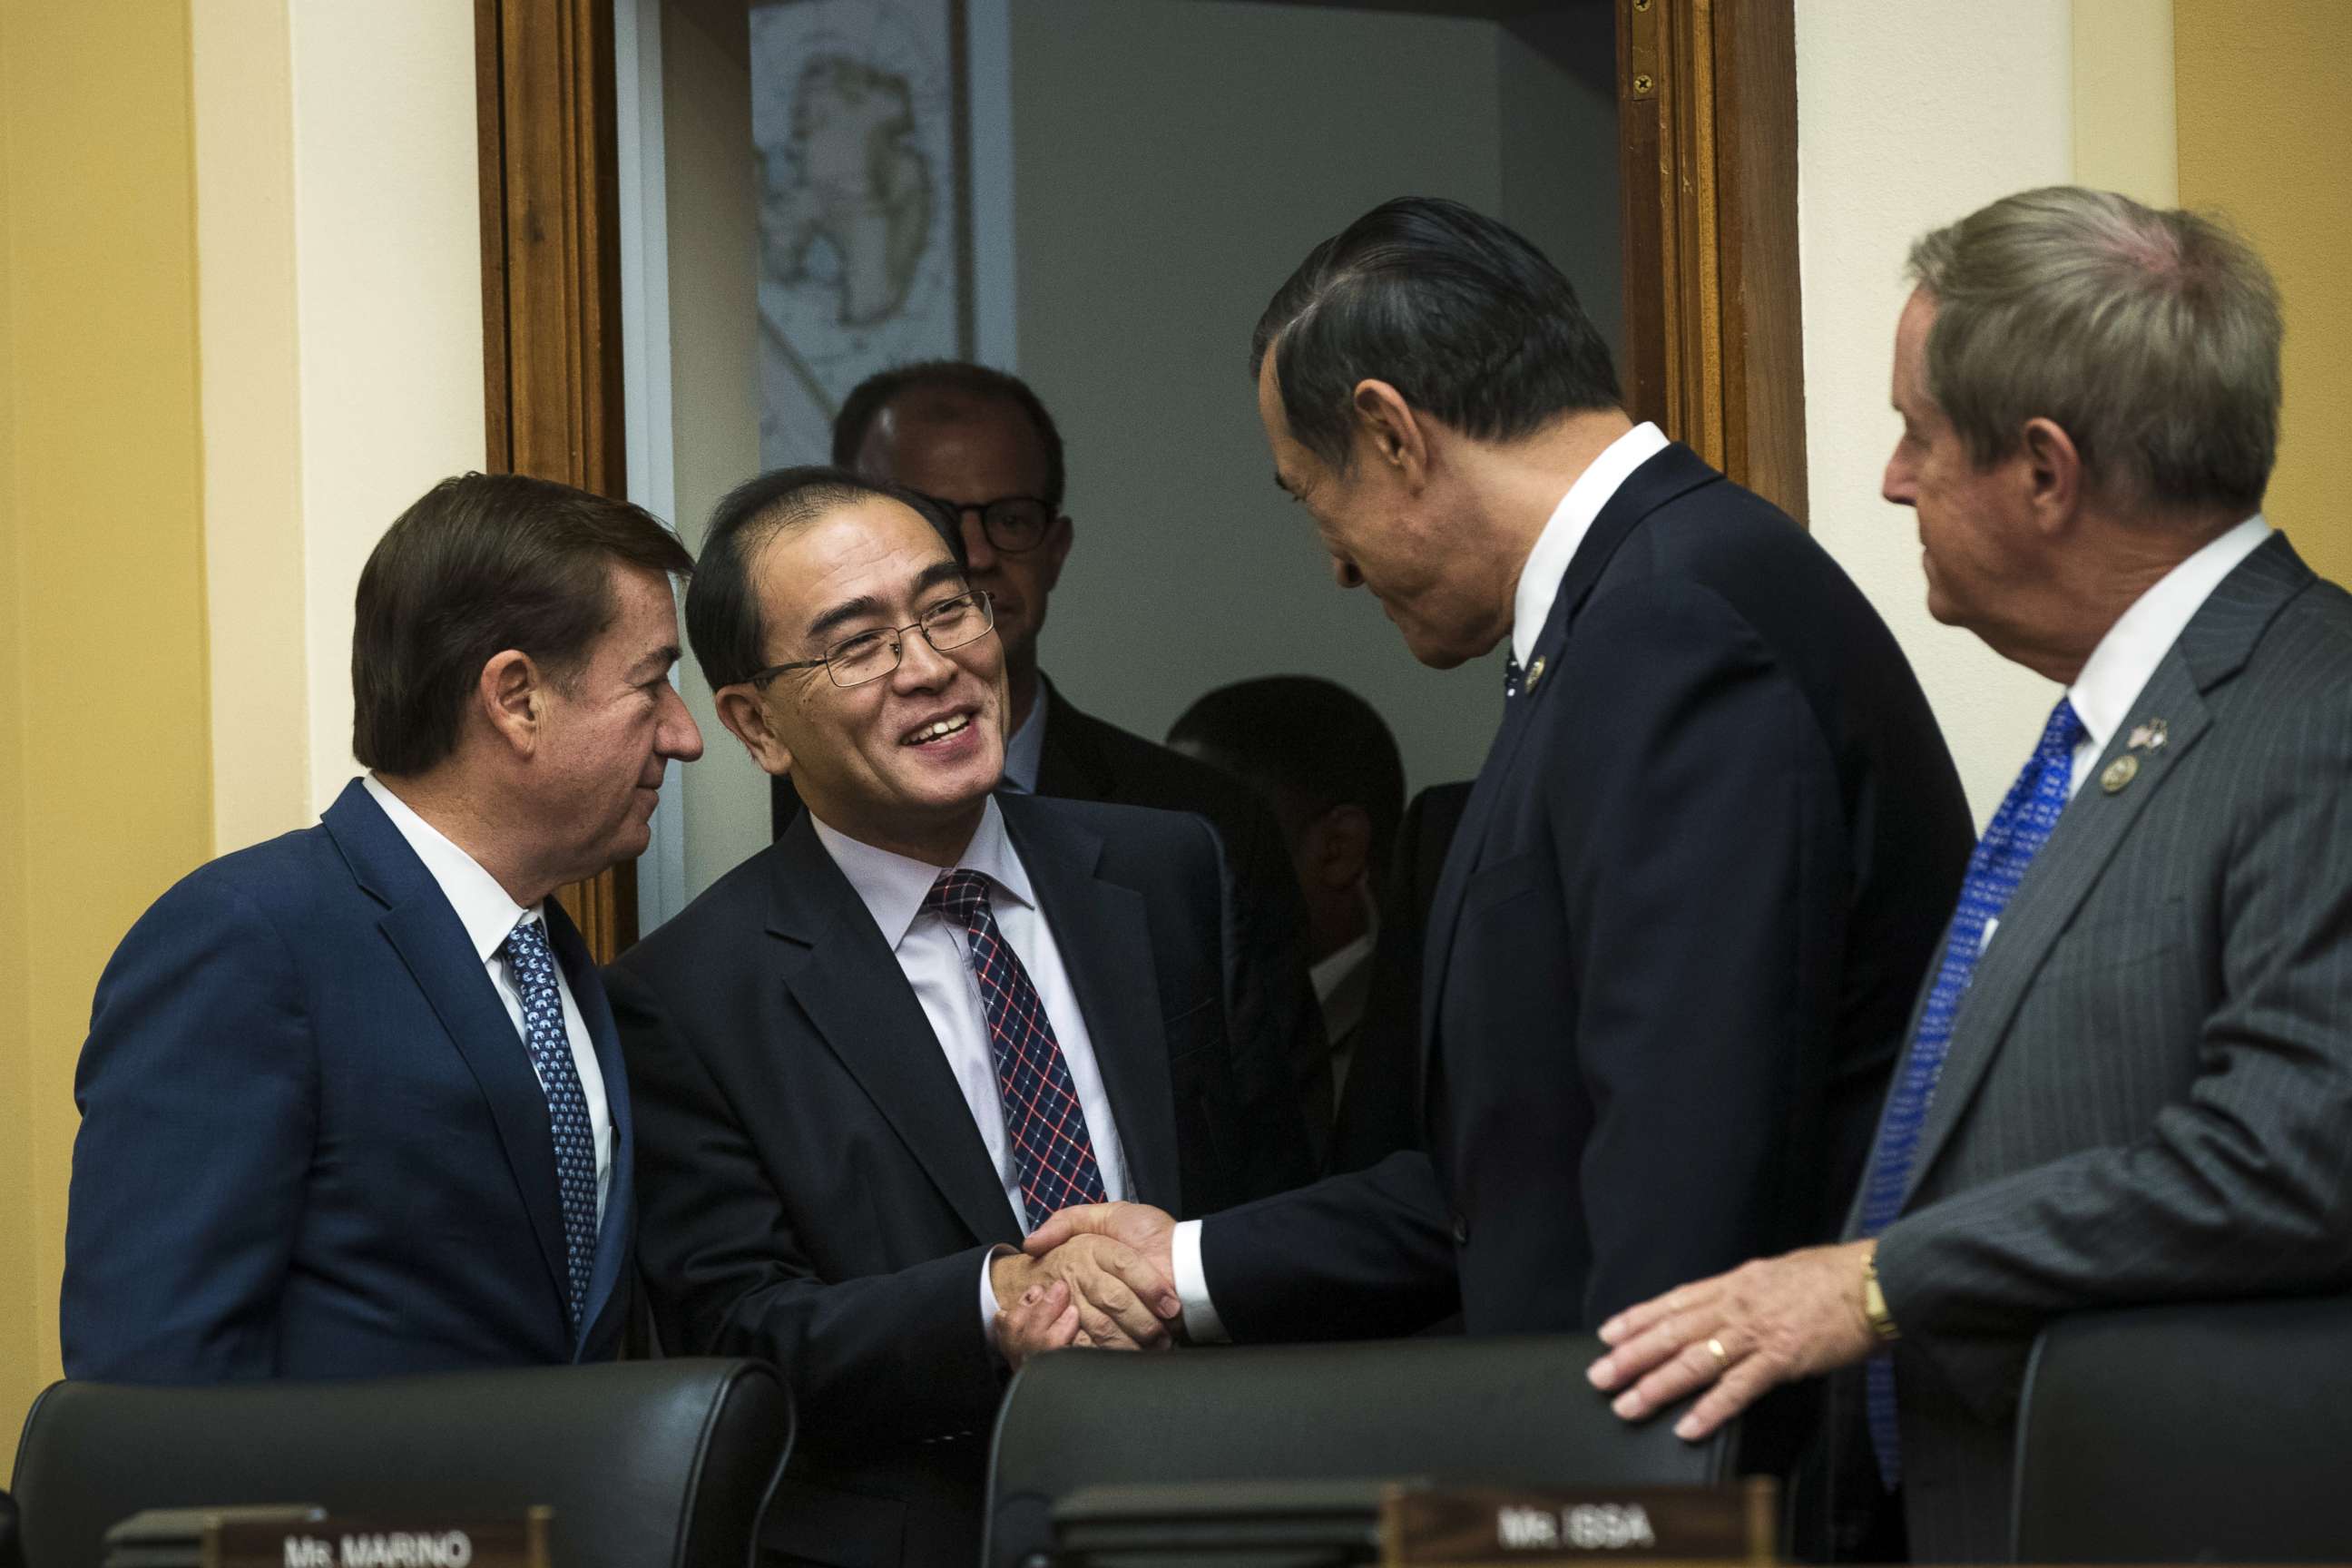 PHOTO: Thae Yong-ho, former chief of mission at the North Korean embassy in the United Kingdom, is greeted by members of congress at the start of a House Foreign Affairs Committee hearing on Capitol Hill, Nov. 1, 2017 in Washington.